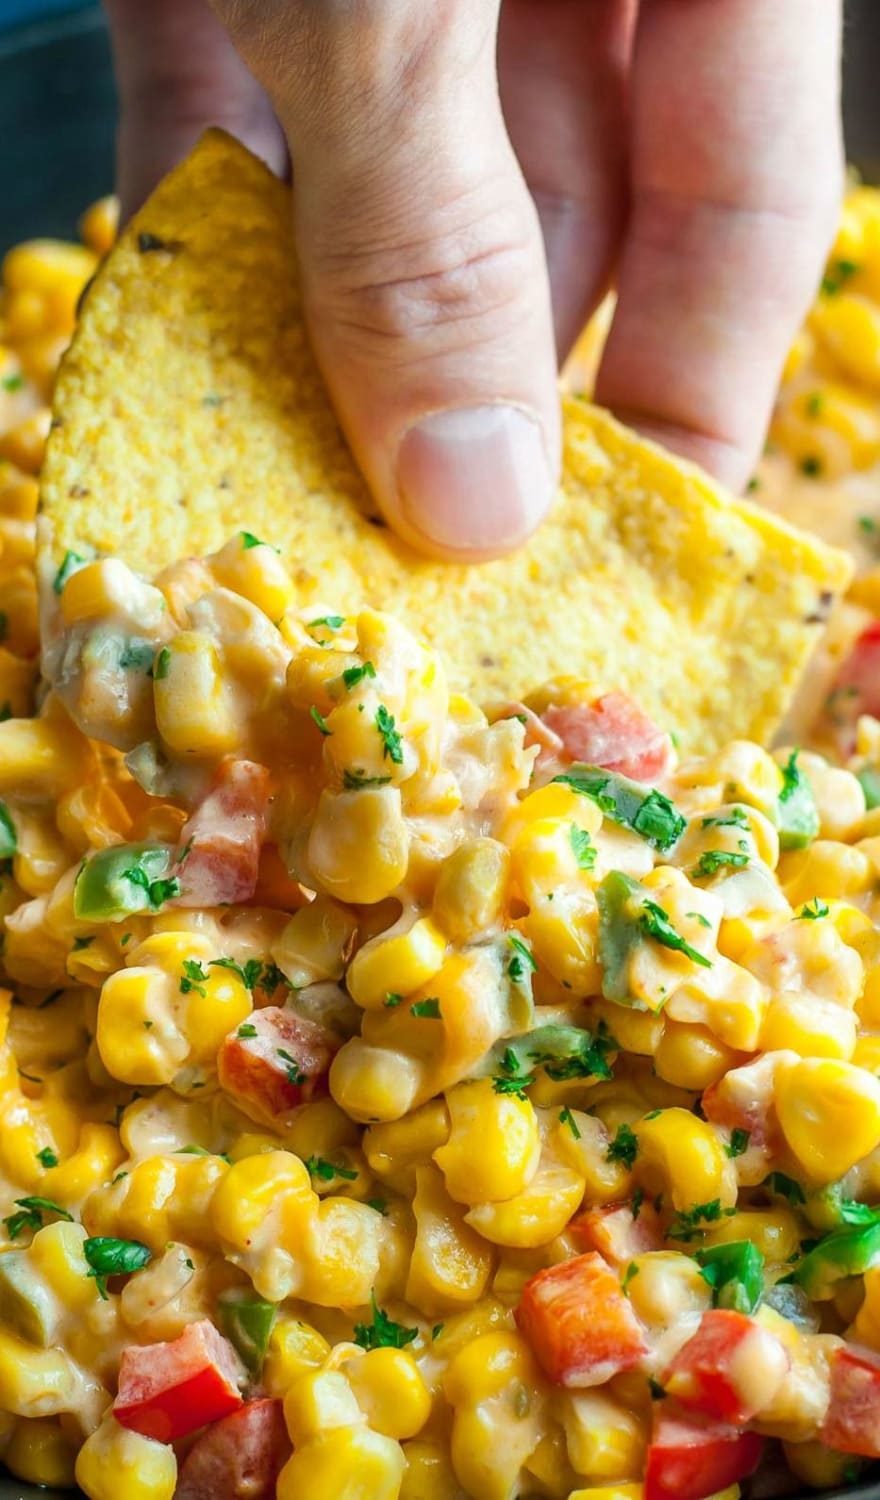 Spicy Southern Hot Corn